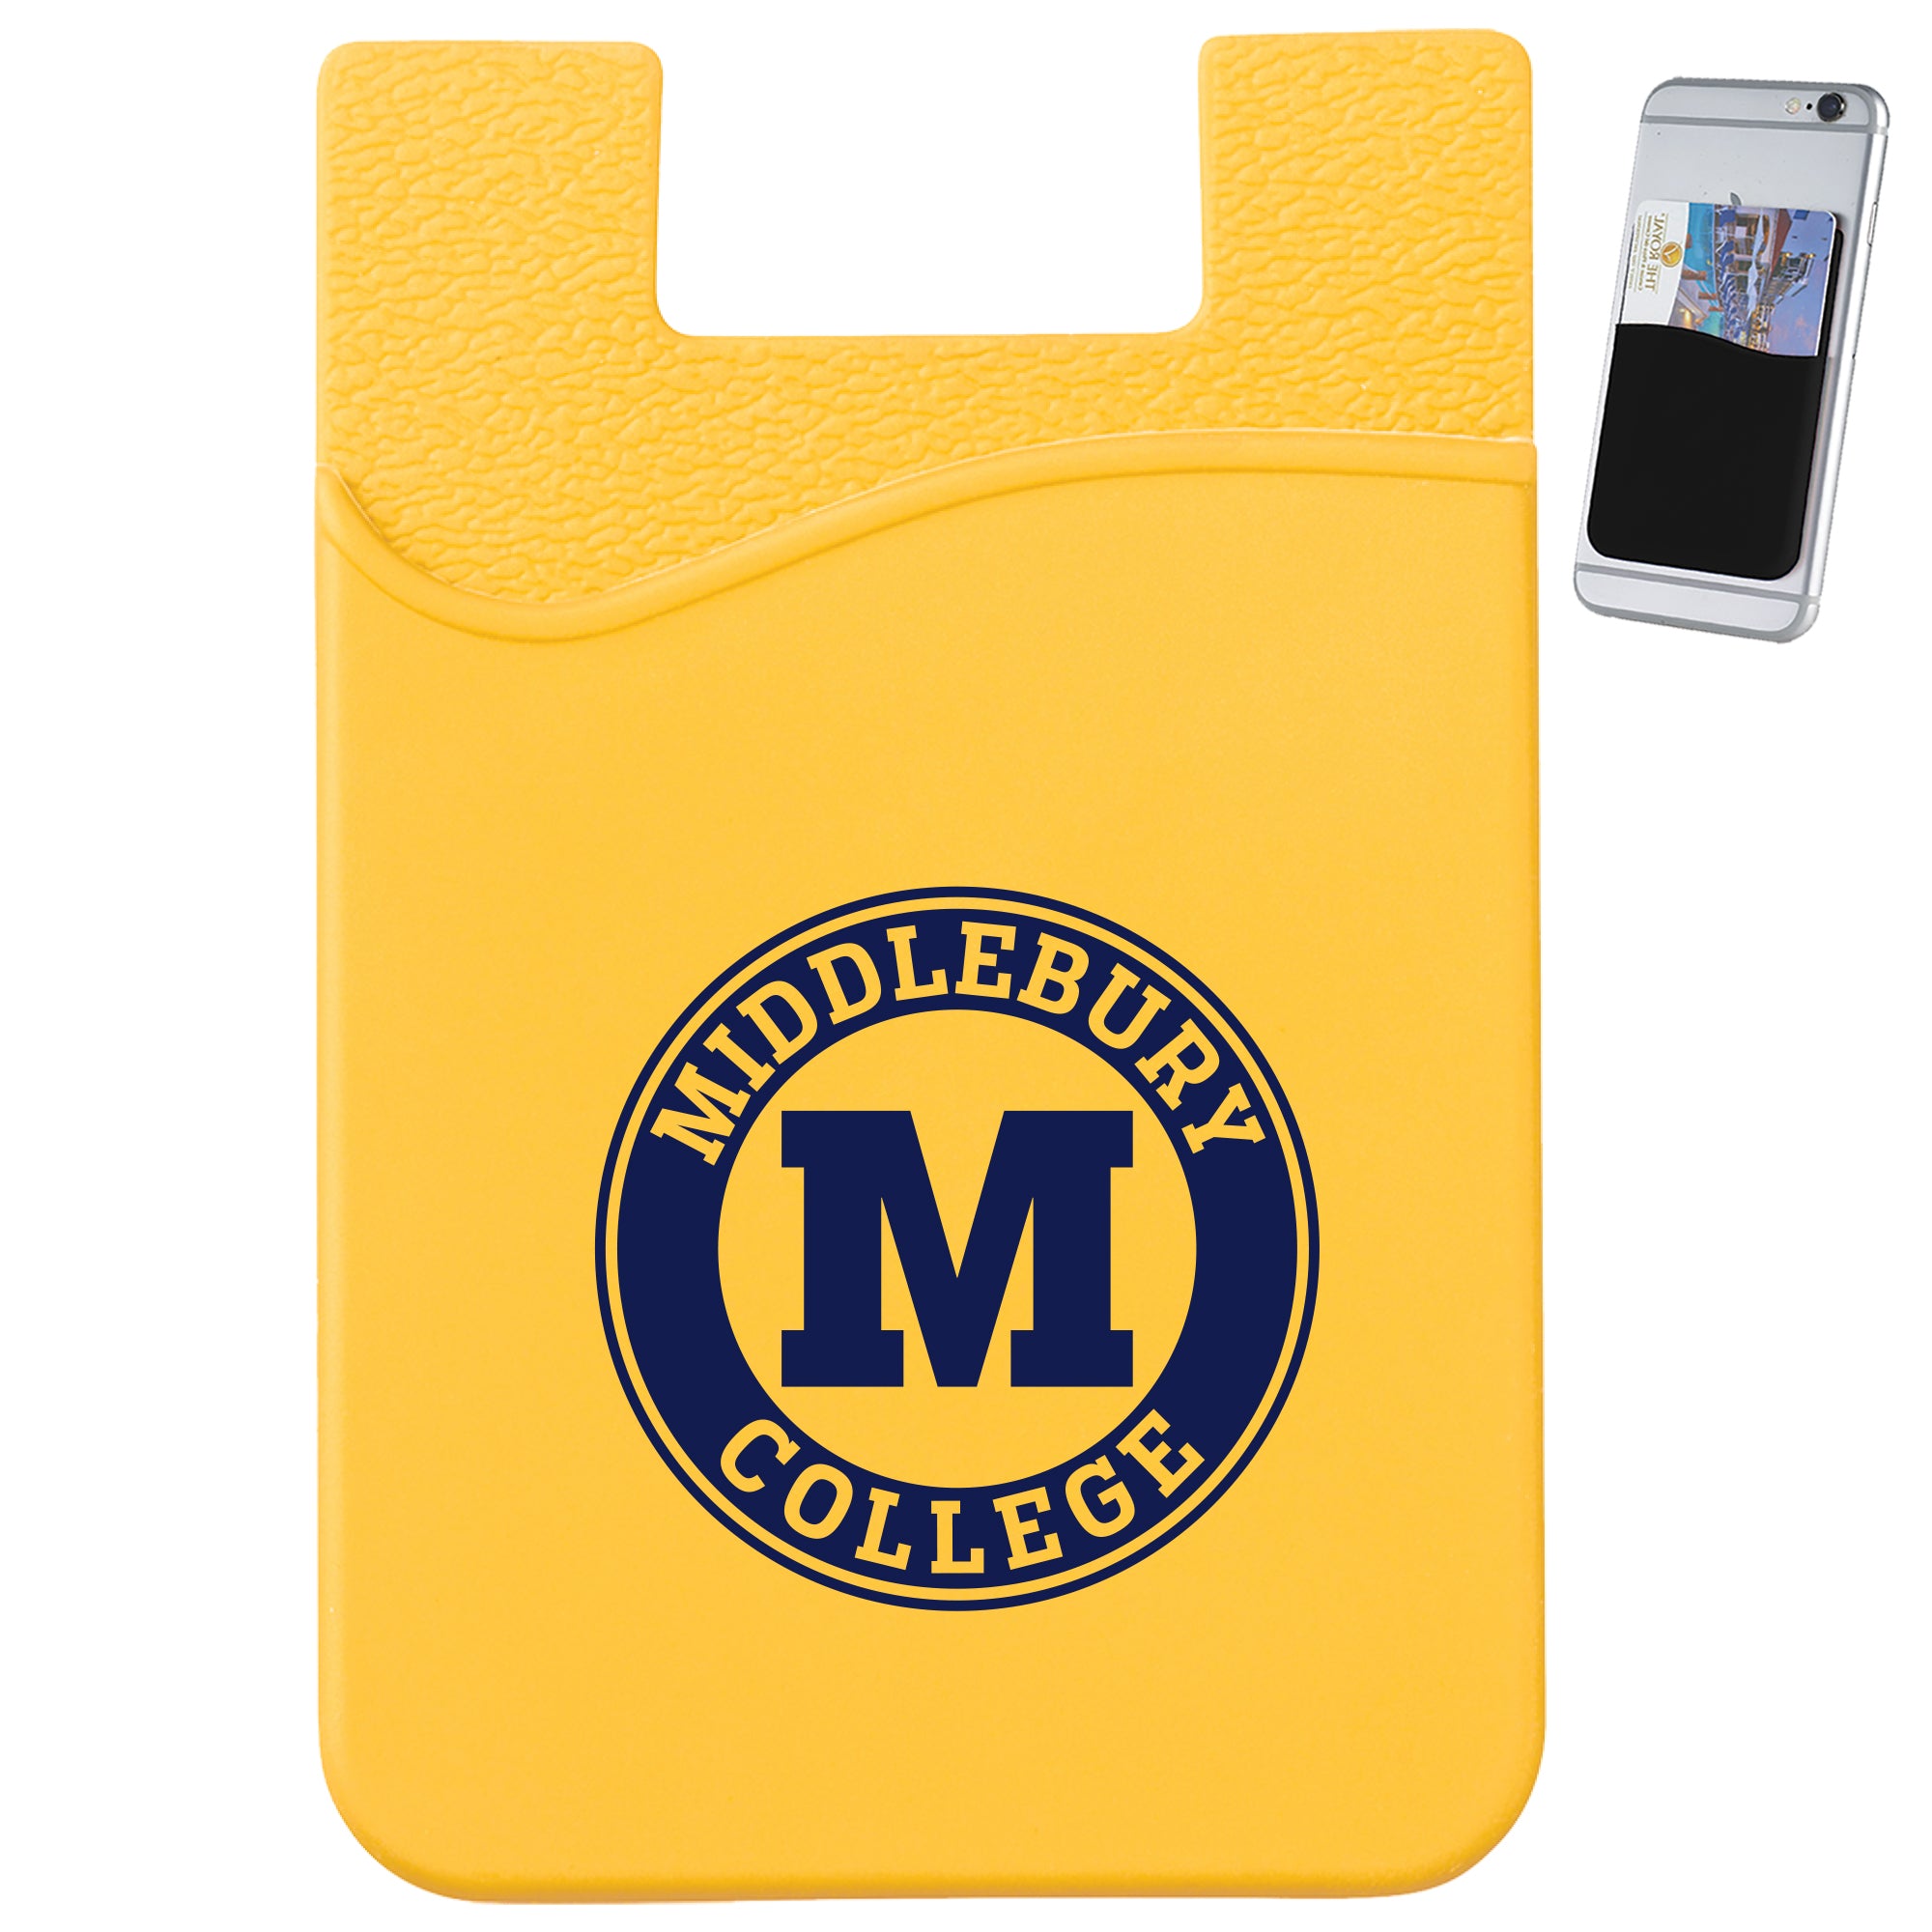 Middlebury Phone Wallet (yellow)